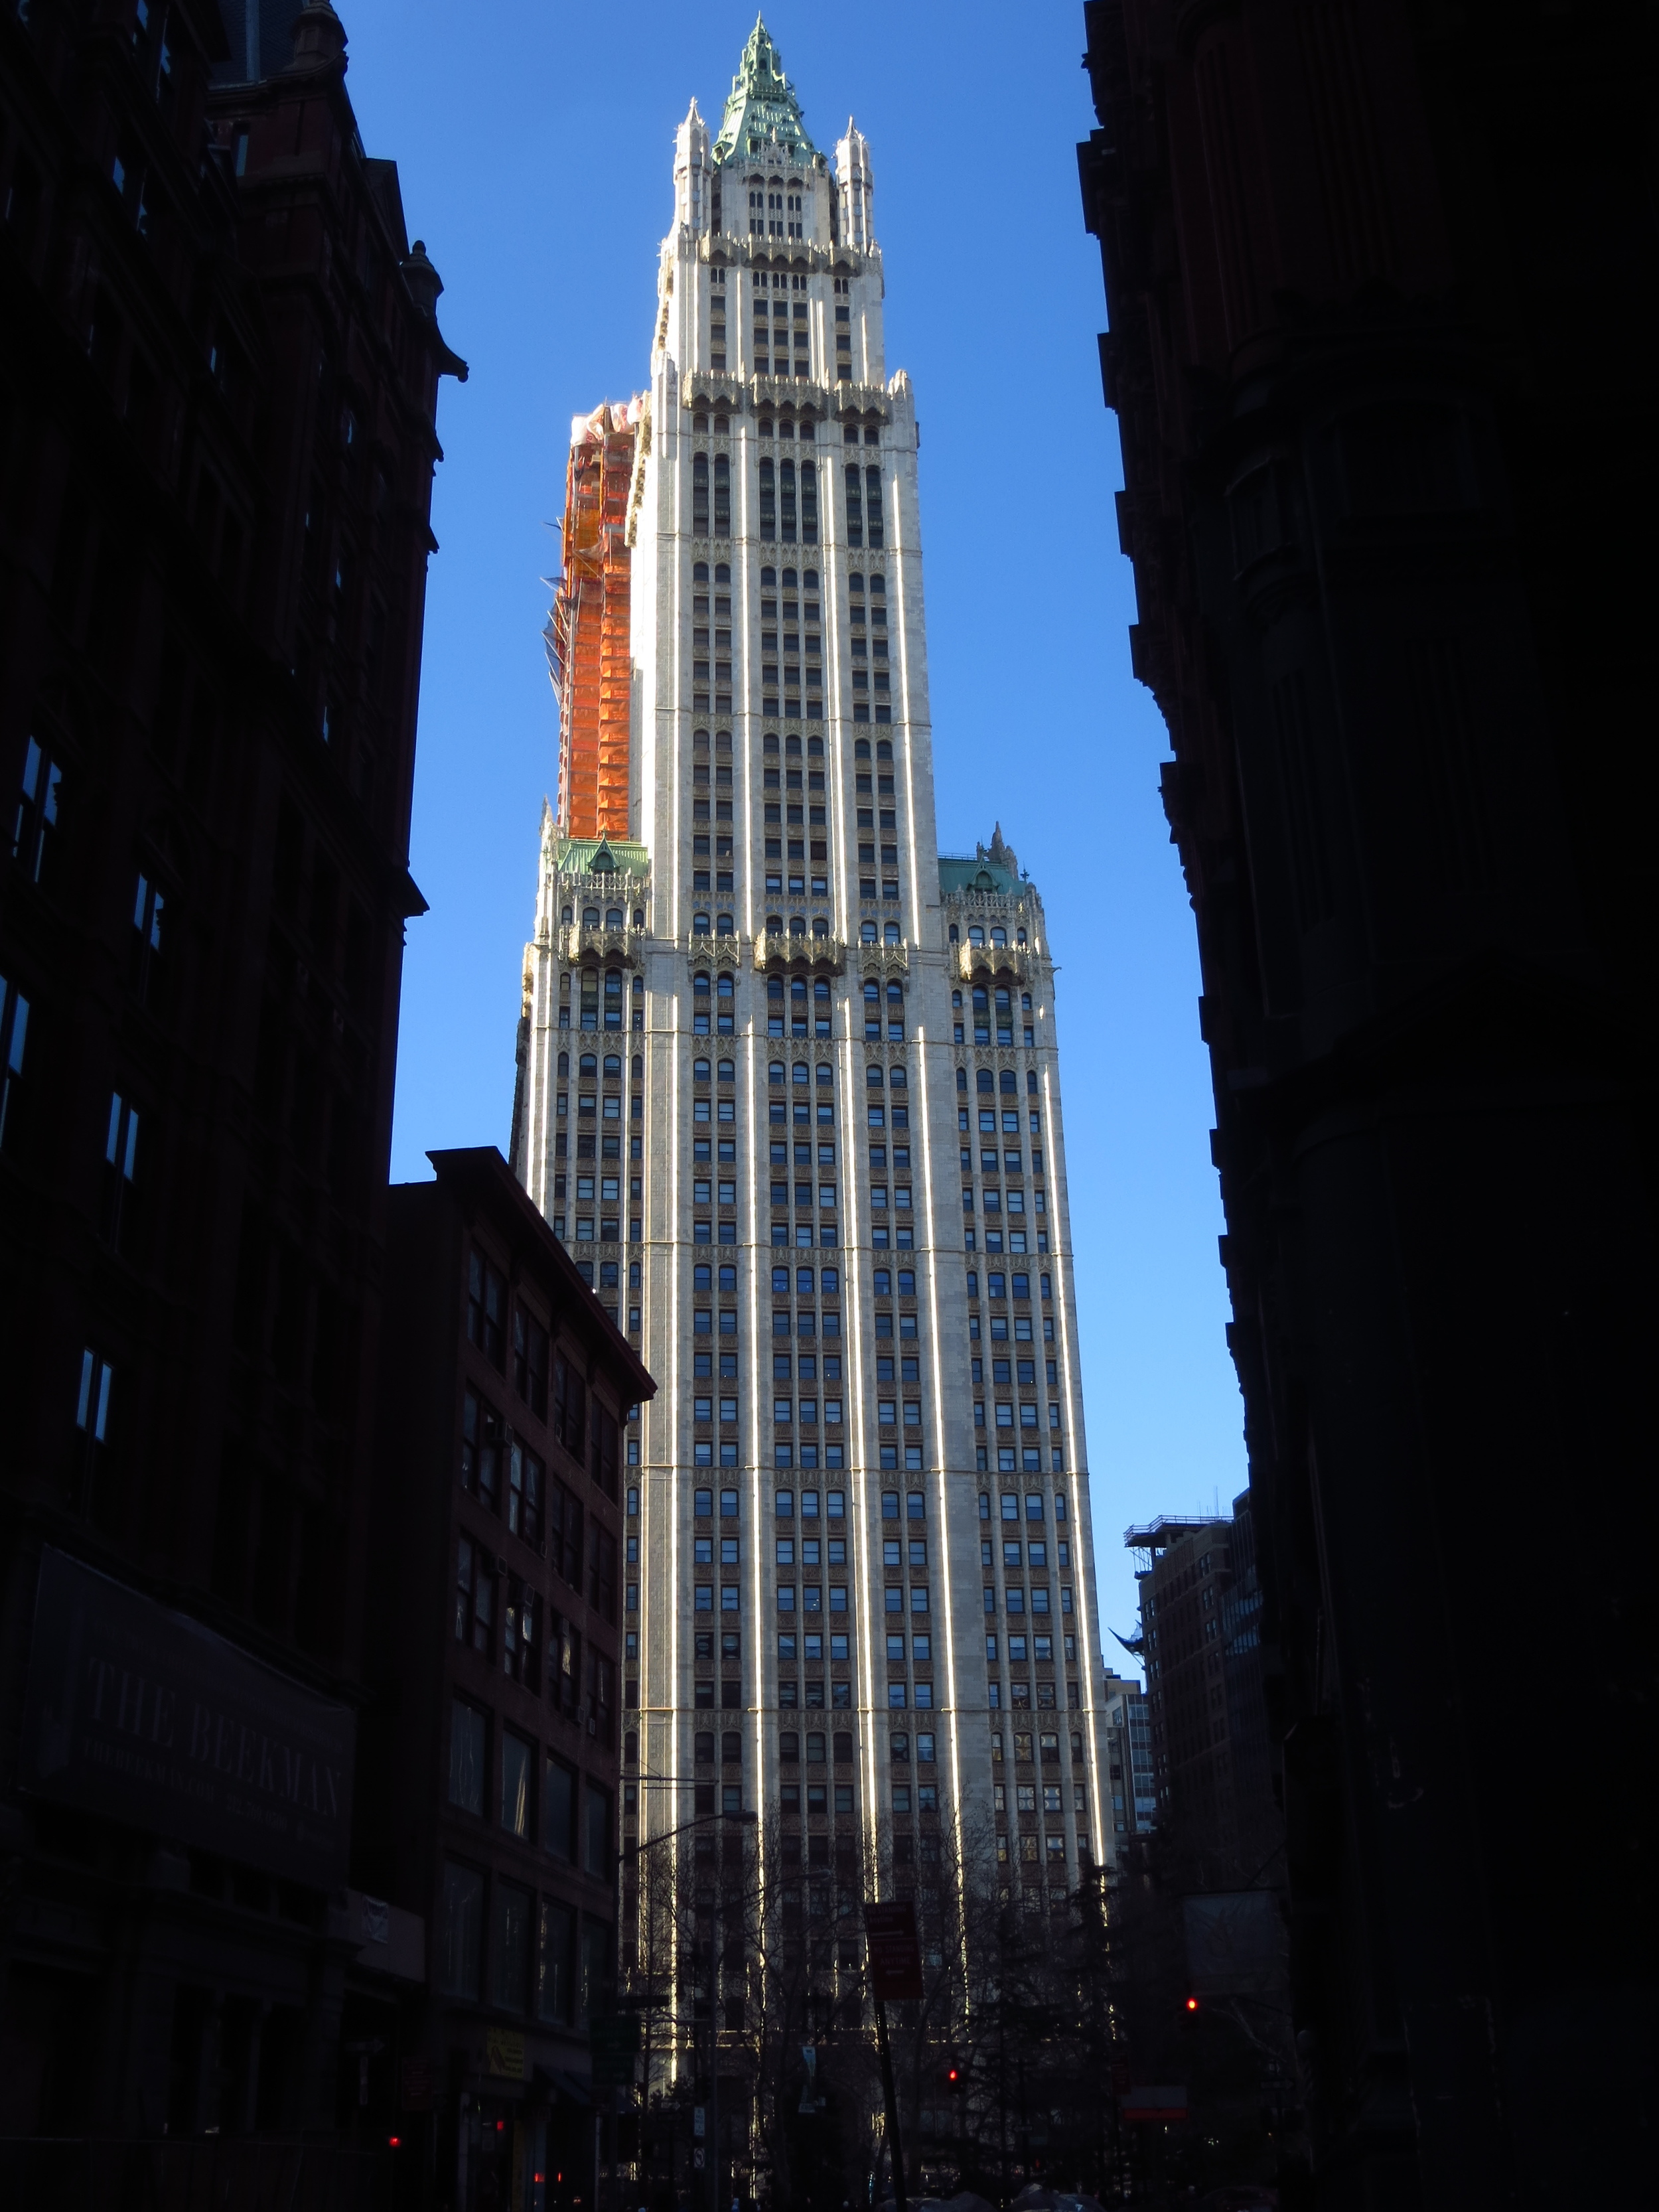 Woolworth Building; World's tallest building from 1913 - 1930